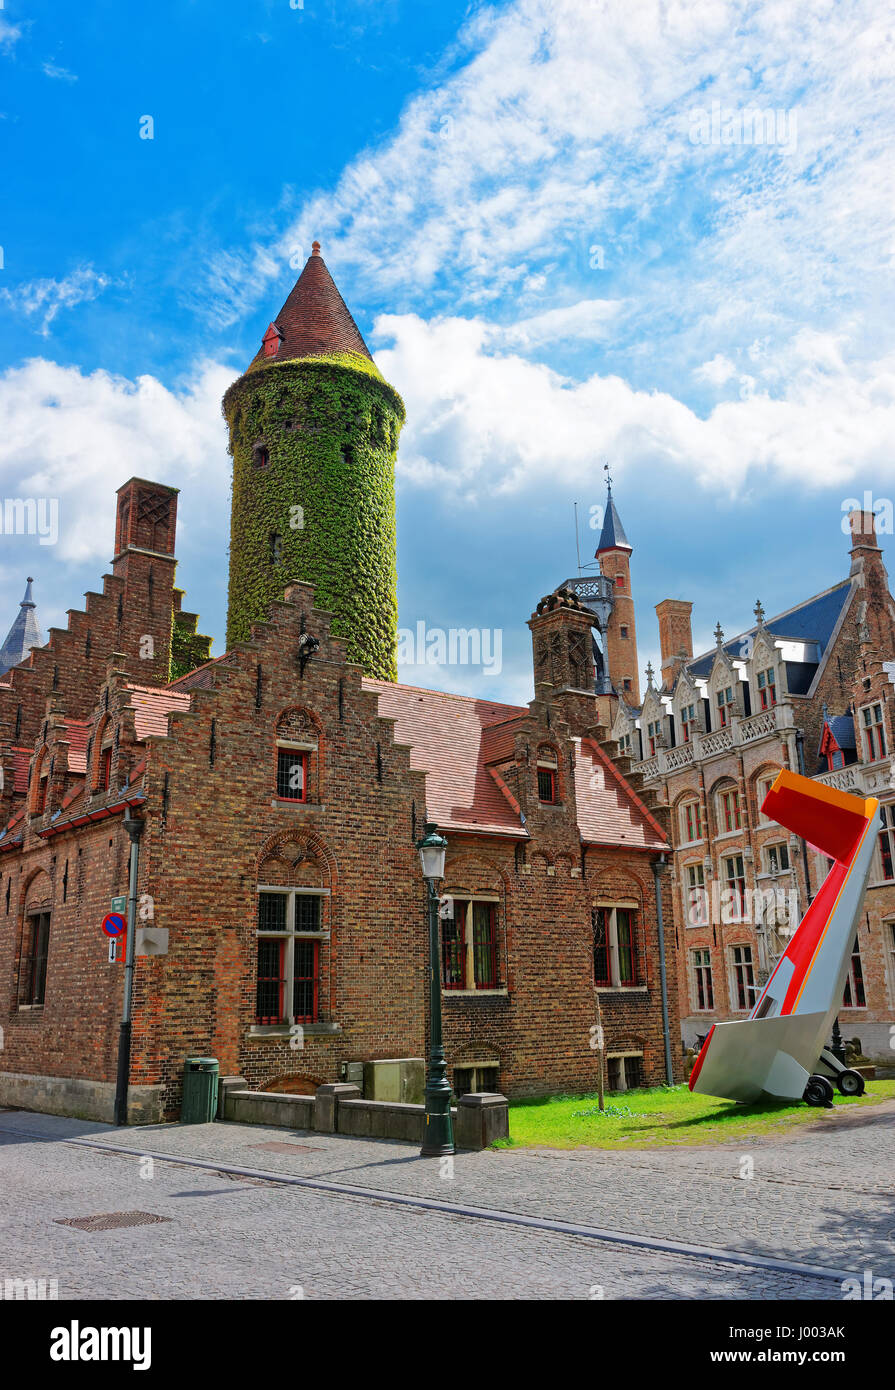 Bruges, Belgium - May 10, 2012: Gruuthuse Museum in the medieval old city of Bruges, Belgium. Stock Photo